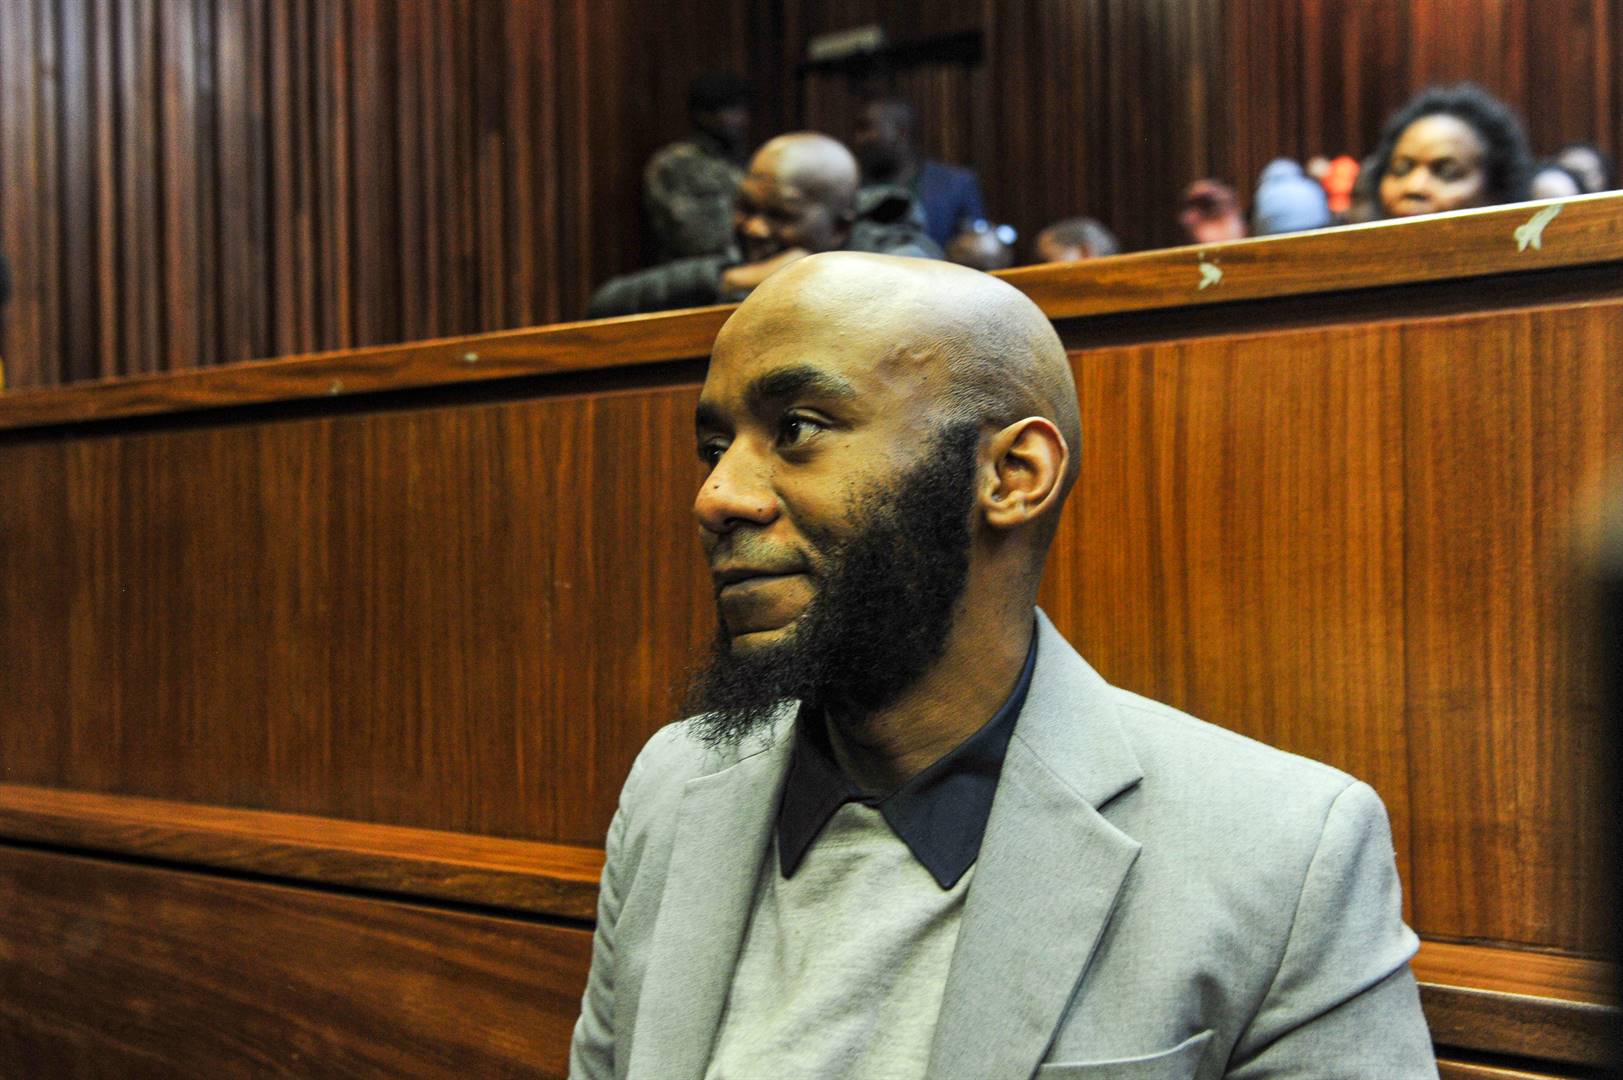 Convicted murderer Ntuthuko Shoba was sentenced to life imprisonment at the South Gauteng High Court for orchestrating the murder of Tshegofatso Pule. Photo: Rosetta Msimango/City Press